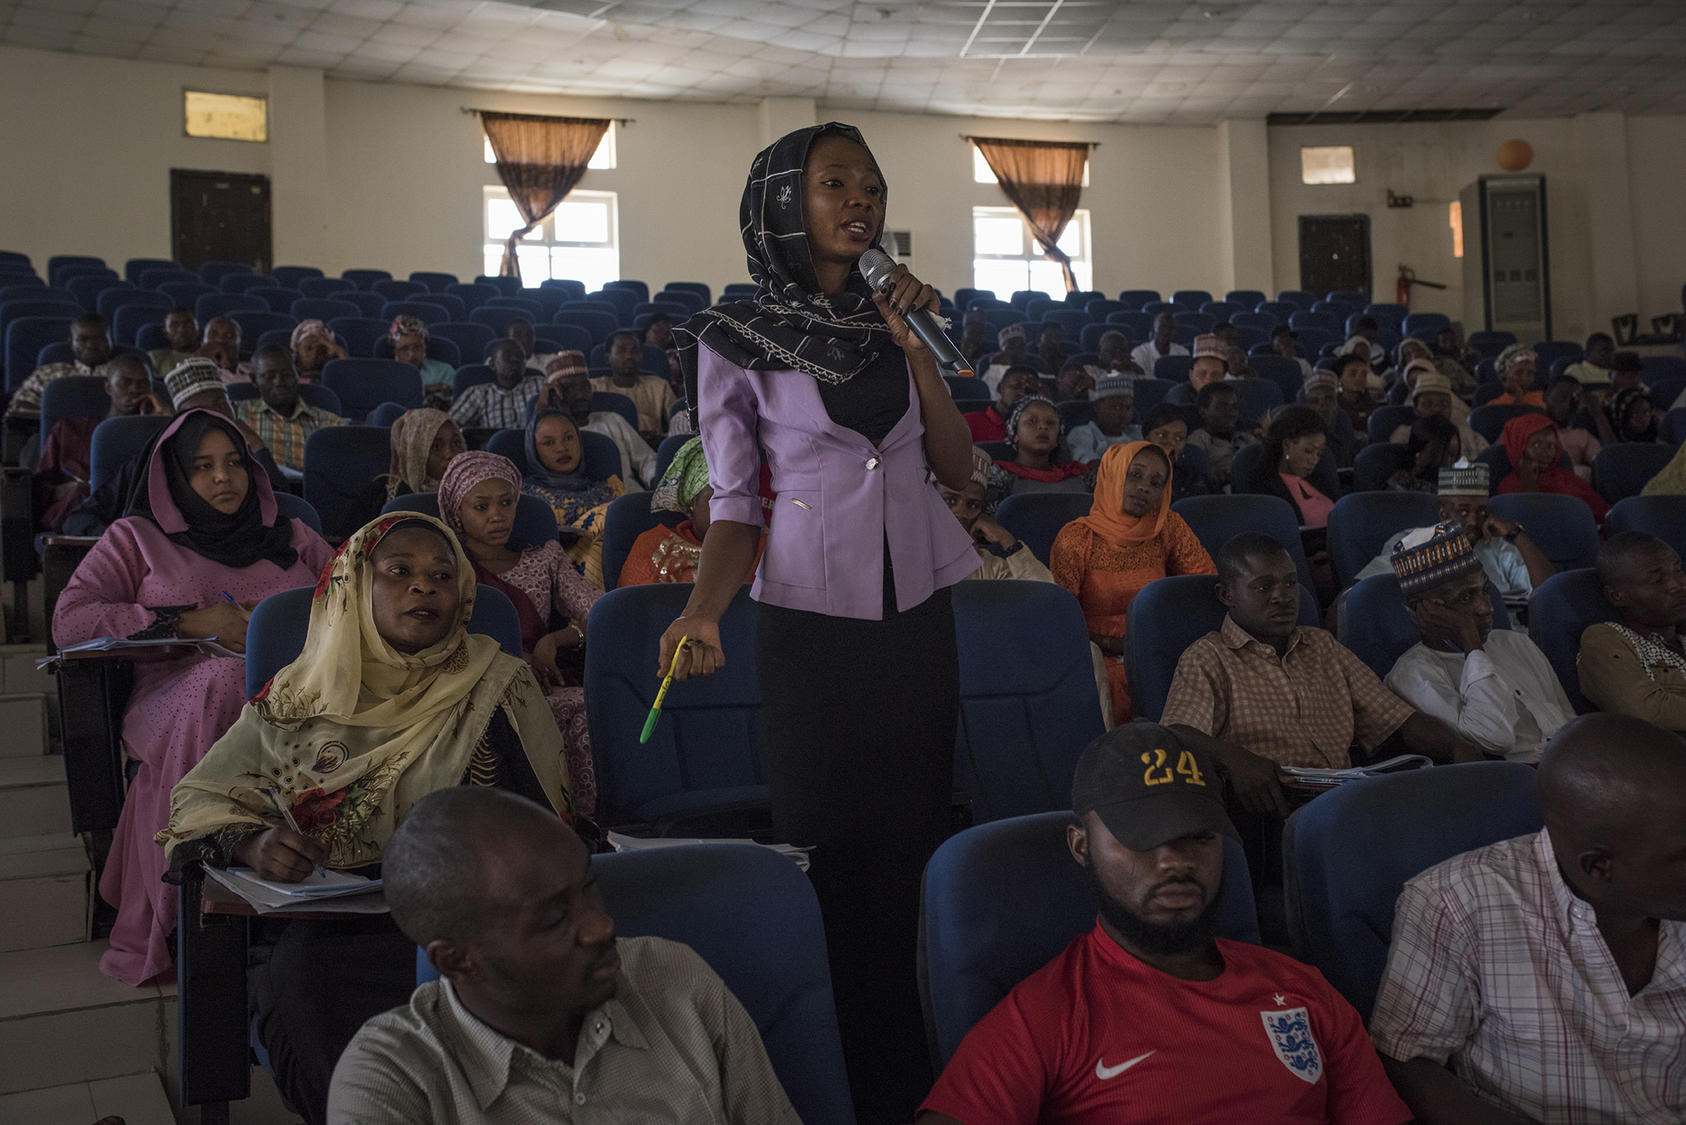 A student participates in a discussion during a gender ethics class at the University of Maiduguri, in Nigeria, Dec. 2, 2017. (Adam Ferguson/The New York Times)